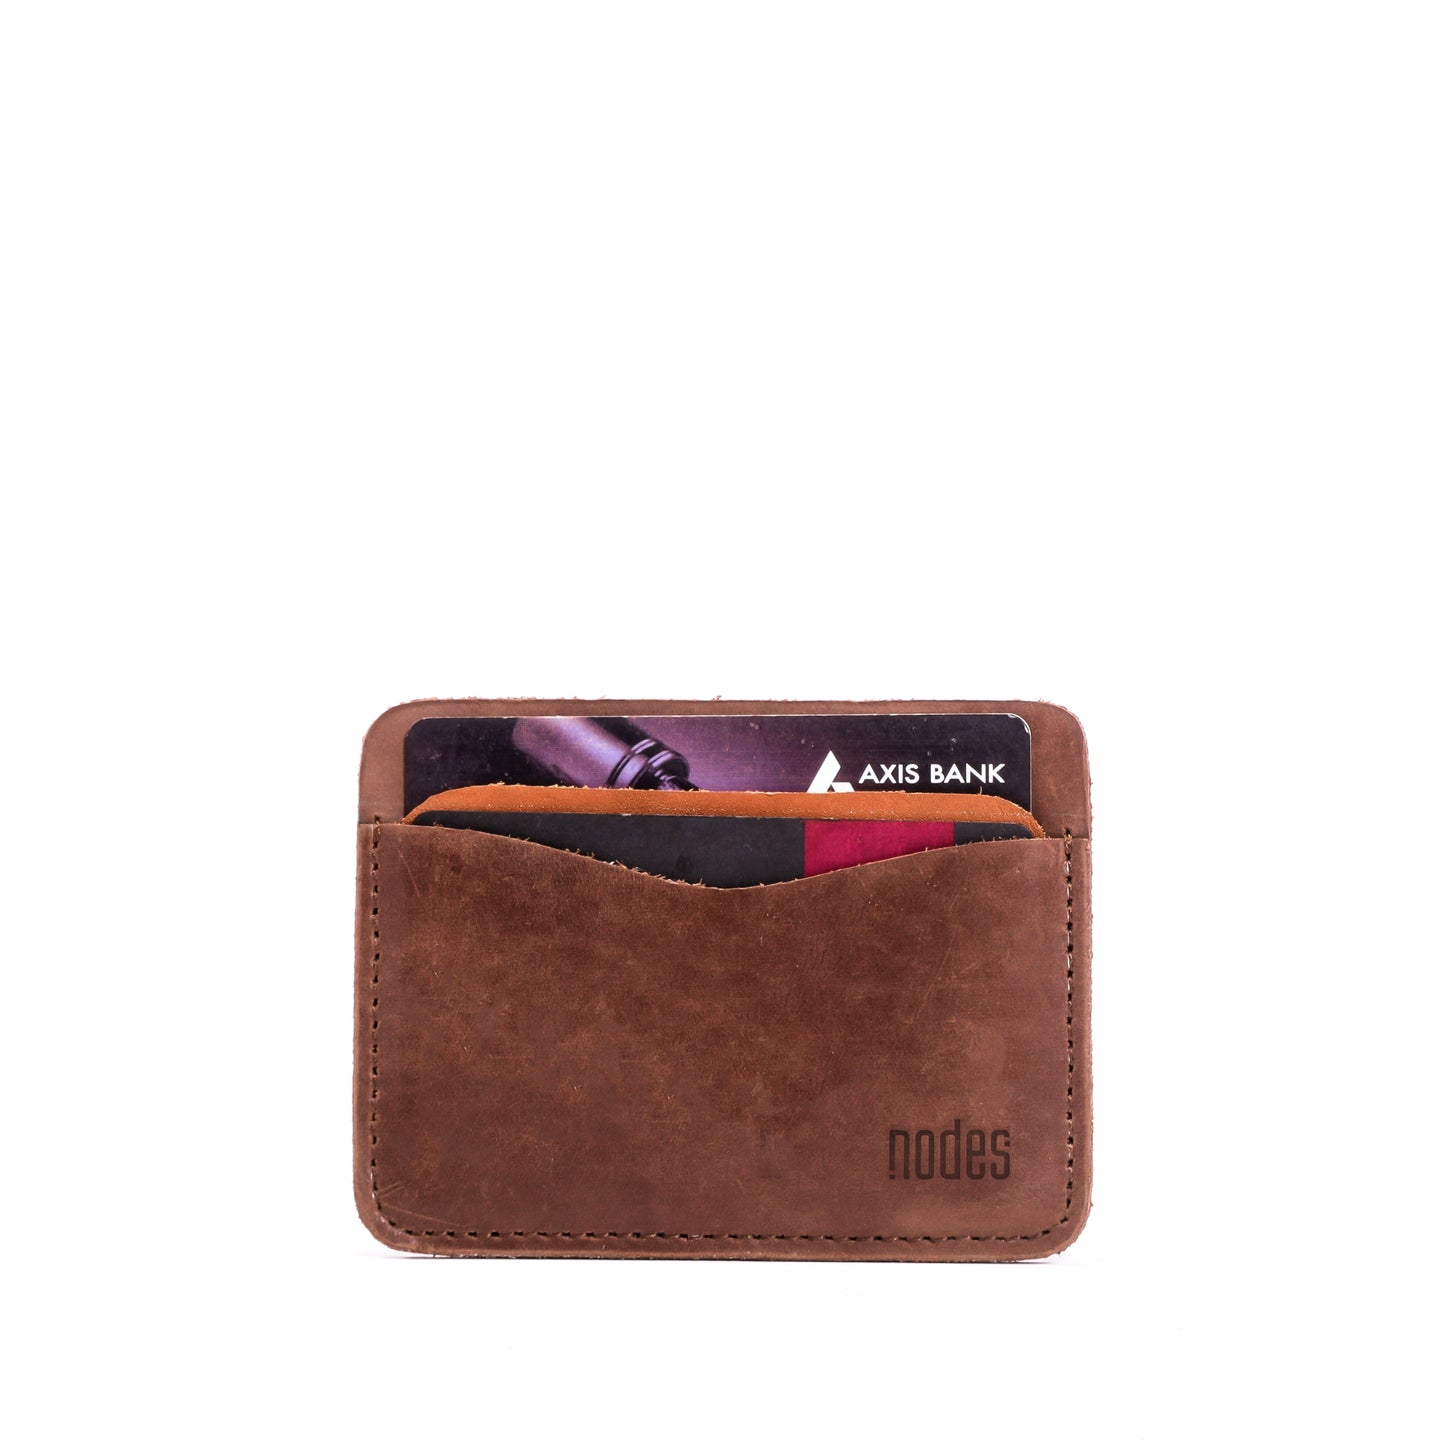 Trustee - Leather Card wallet - Horizontal